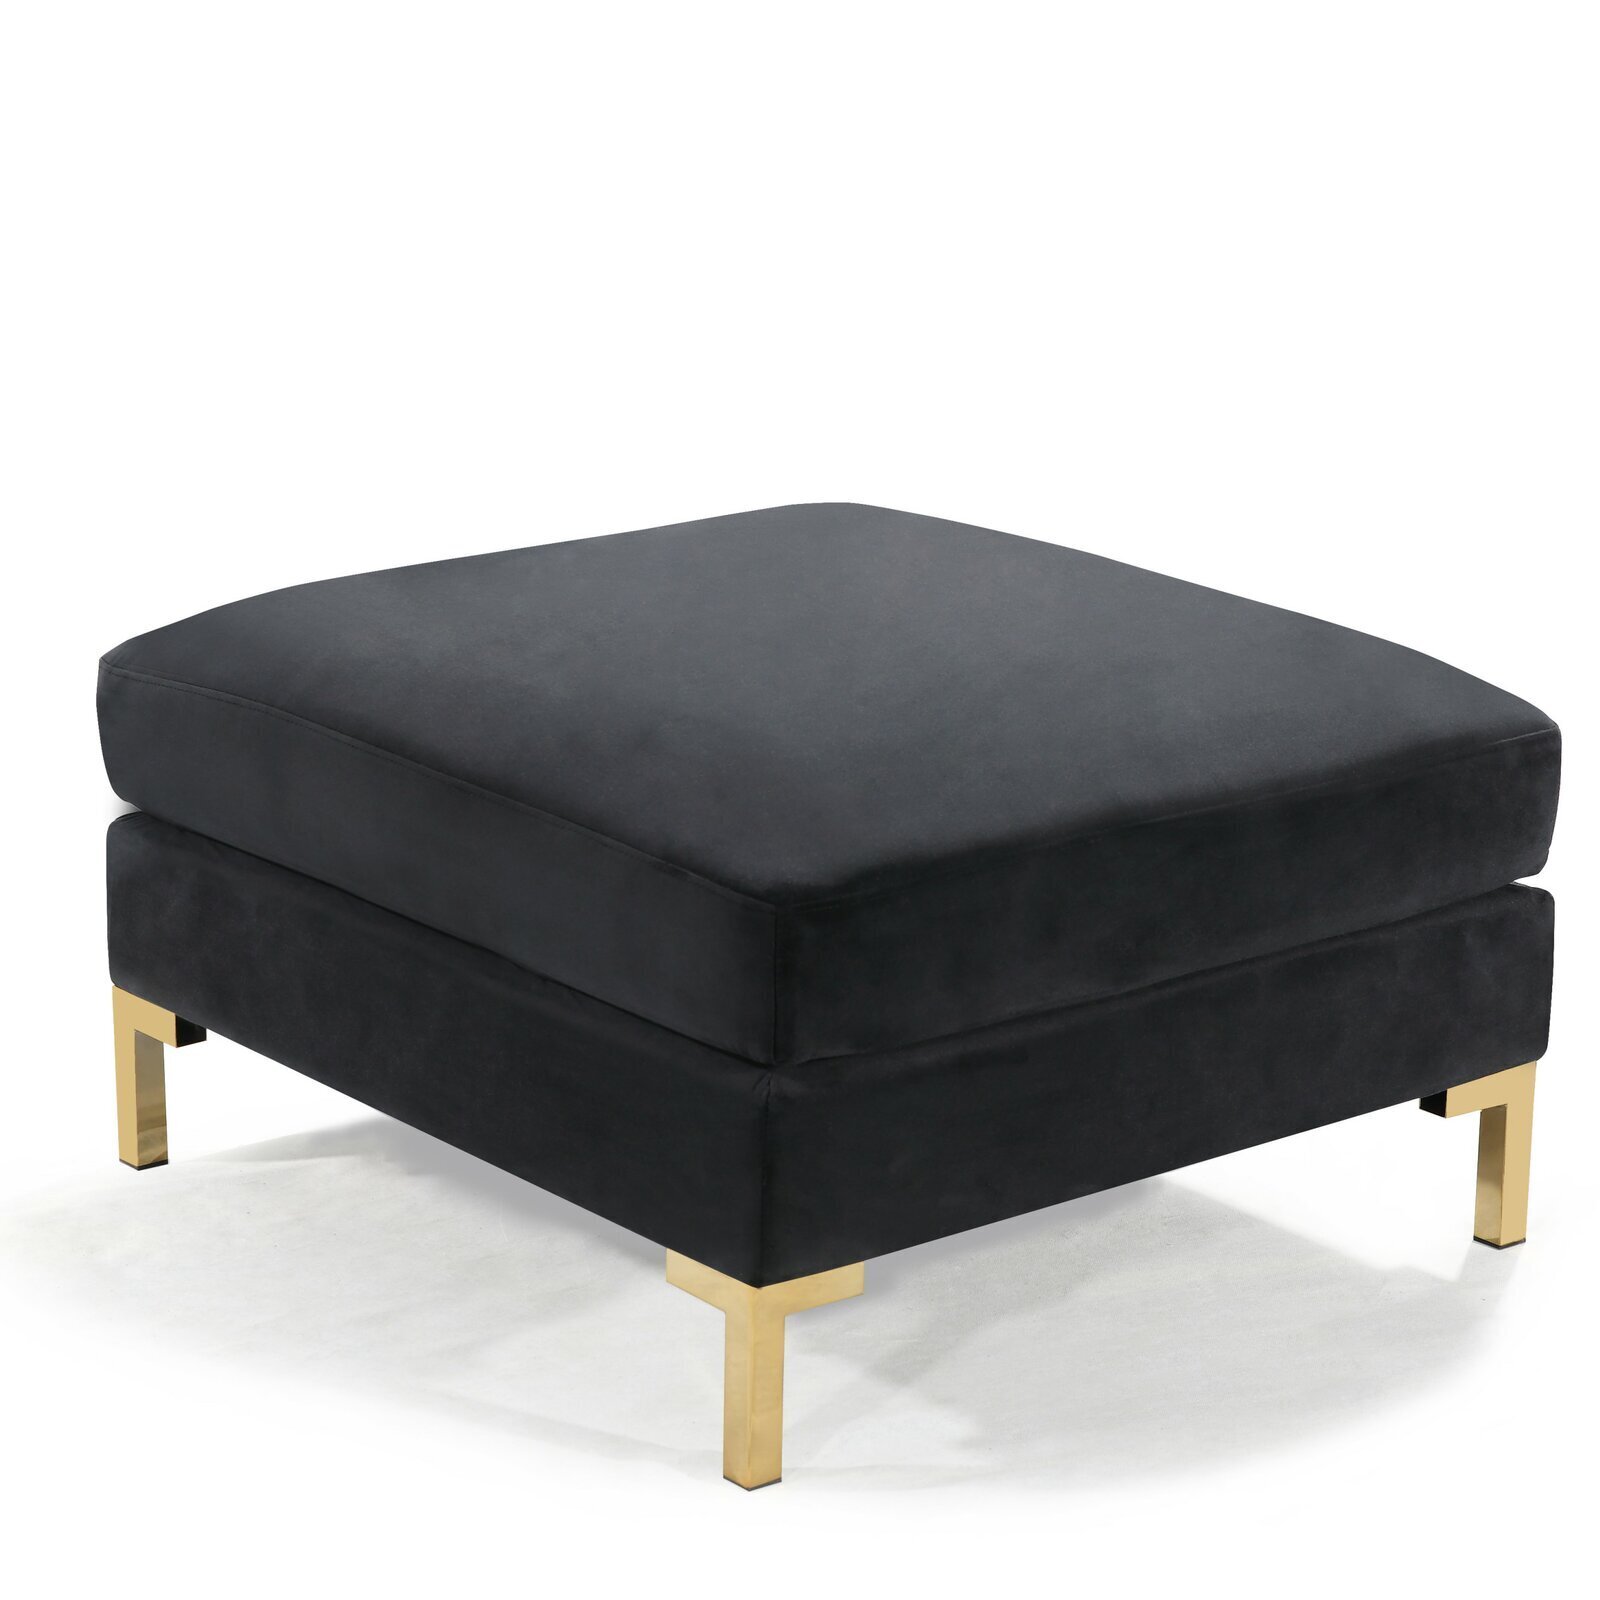 Square Coffee Table and Ottoman Combo